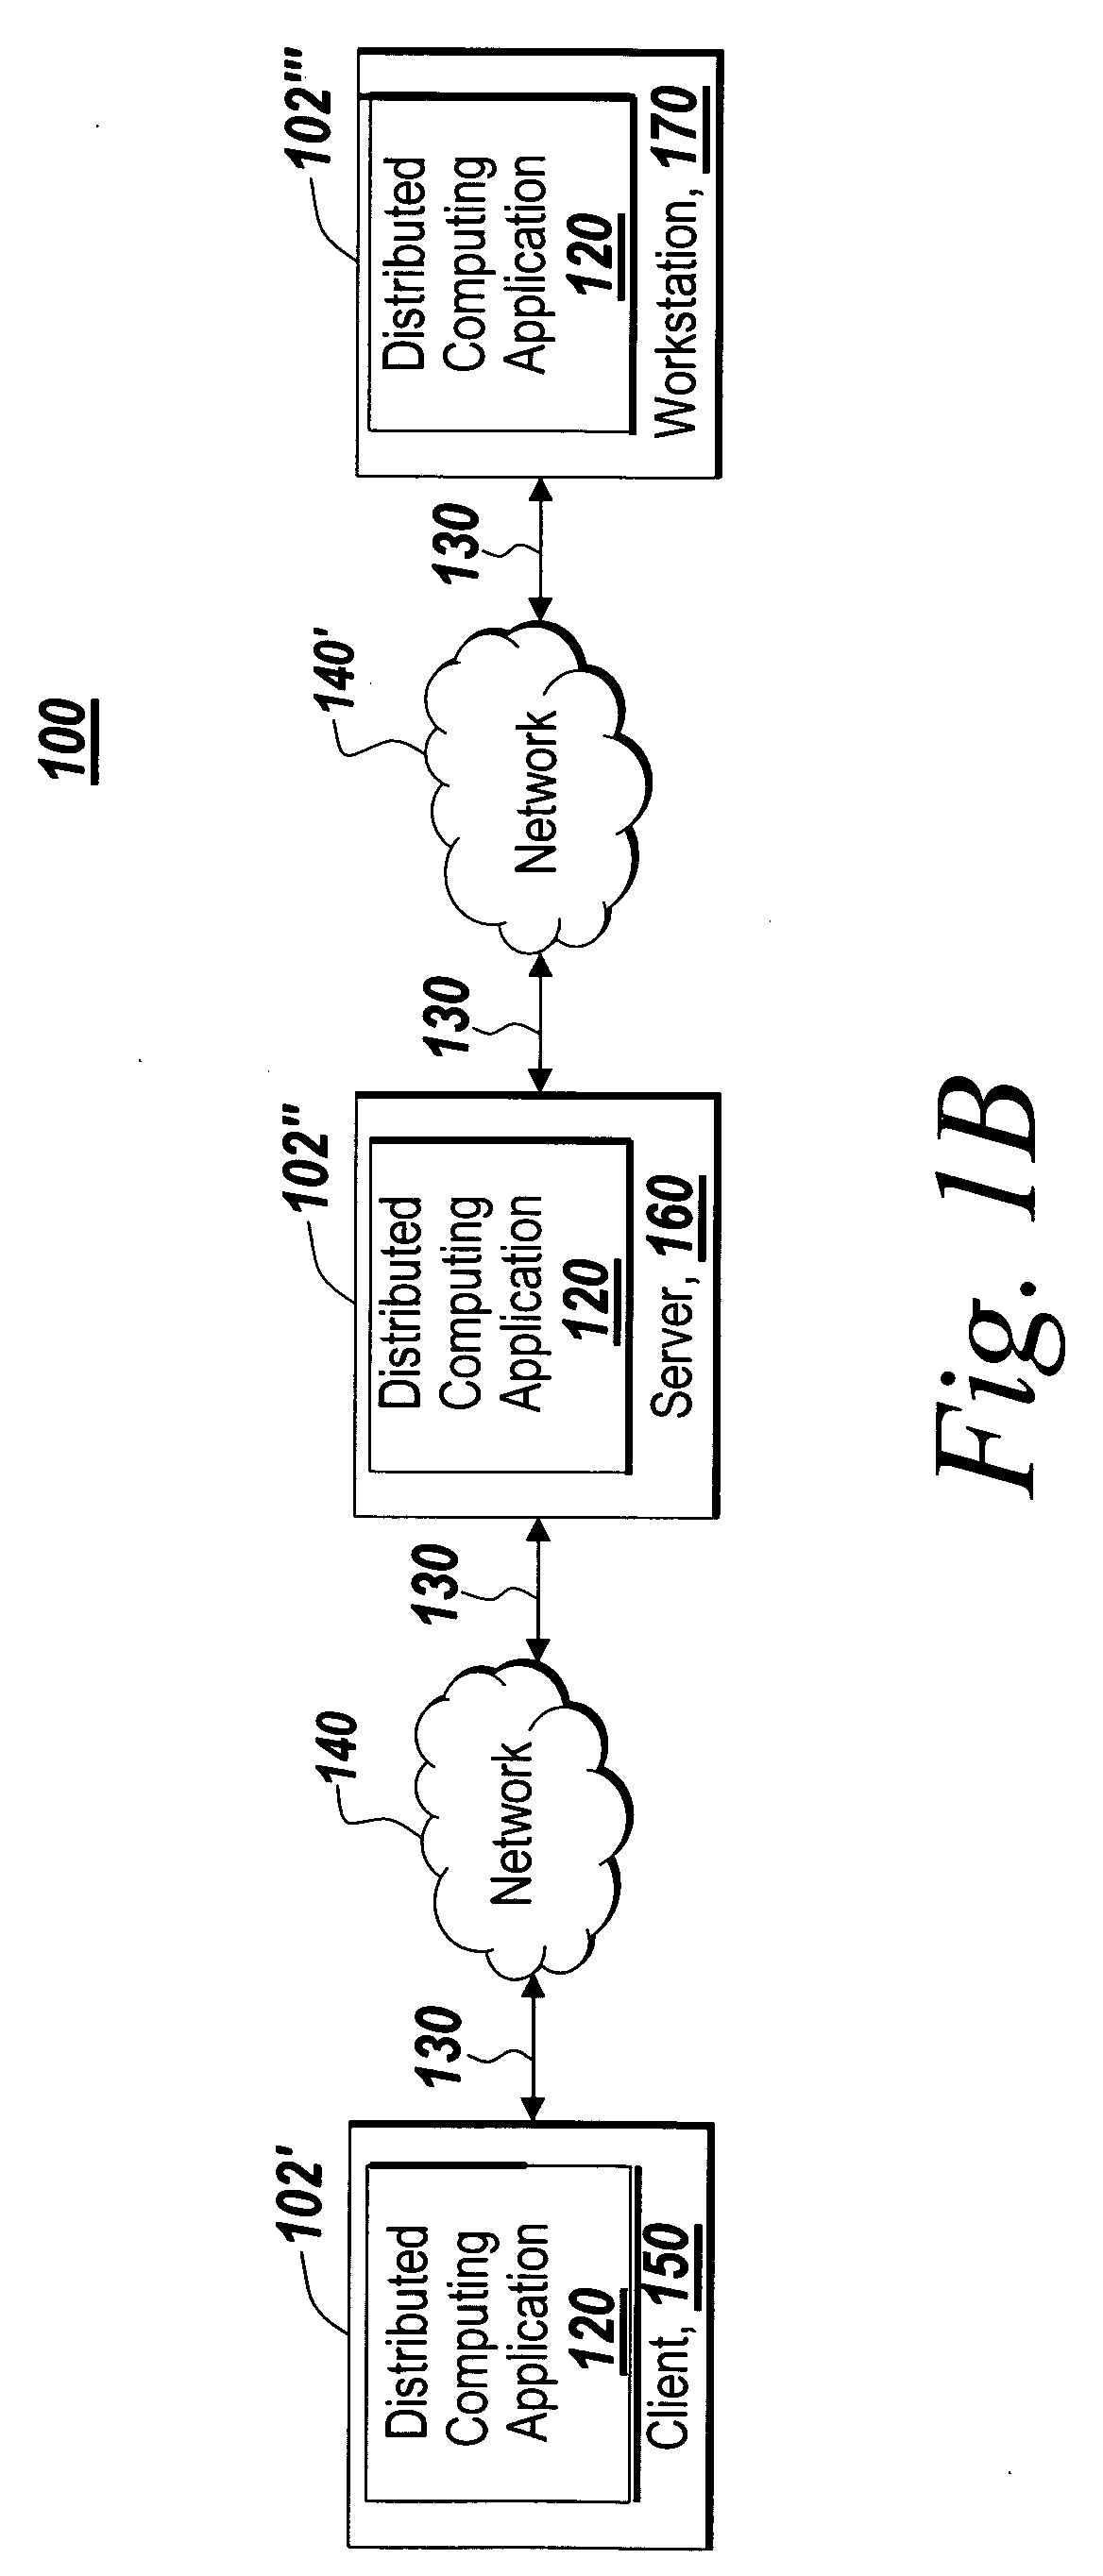 Instrument-based distributed computing systems